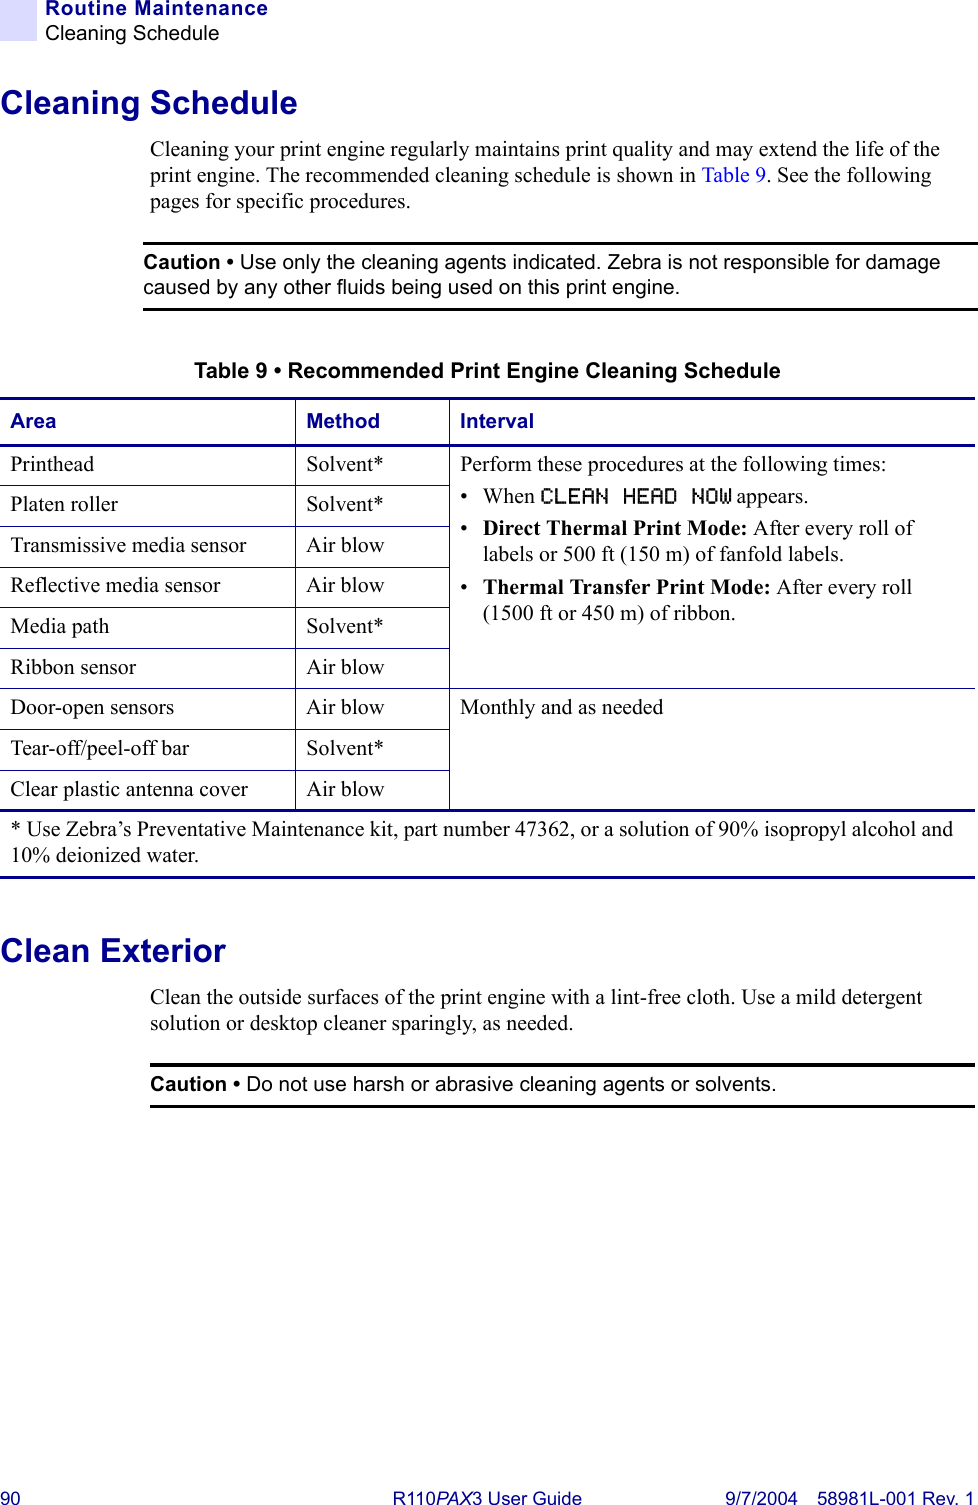 90 R110PA X3 User Guide 9/7/2004 58981L-001 Rev. 1Routine MaintenanceCleaning ScheduleCleaning ScheduleCleaning your print engine regularly maintains print quality and may extend the life of the print engine. The recommended cleaning schedule is shown in Table 9. See the following pages for specific procedures.Clean ExteriorClean the outside surfaces of the print engine with a lint-free cloth. Use a mild detergent solution or desktop cleaner sparingly, as needed.Caution • Use only the cleaning agents indicated. Zebra is not responsible for damage caused by any other fluids being used on this print engine.Table 9 • Recommended Print Engine Cleaning ScheduleArea Method IntervalPrinthead Solvent* Perform these procedures at the following times:•When CLEAN HEAD NOW appears.•Direct Thermal Print Mode: After every roll of labels or 500 ft (150 m) of fanfold labels.•Thermal Transfer Print Mode: After every roll (1500 ft or 450 m) of ribbon.Platen roller Solvent*Transmissive media sensor Air blowReflective media sensor Air blowMedia path Solvent*Ribbon sensor Air blowDoor-open sensors Air blow Monthly and as neededTear-off/peel-off bar Solvent*Clear plastic antenna cover Air blow* Use Zebra’s Preventative Maintenance kit, part number 47362, or a solution of 90% isopropyl alcohol and 10% deionized water. Caution • Do not use harsh or abrasive cleaning agents or solvents.